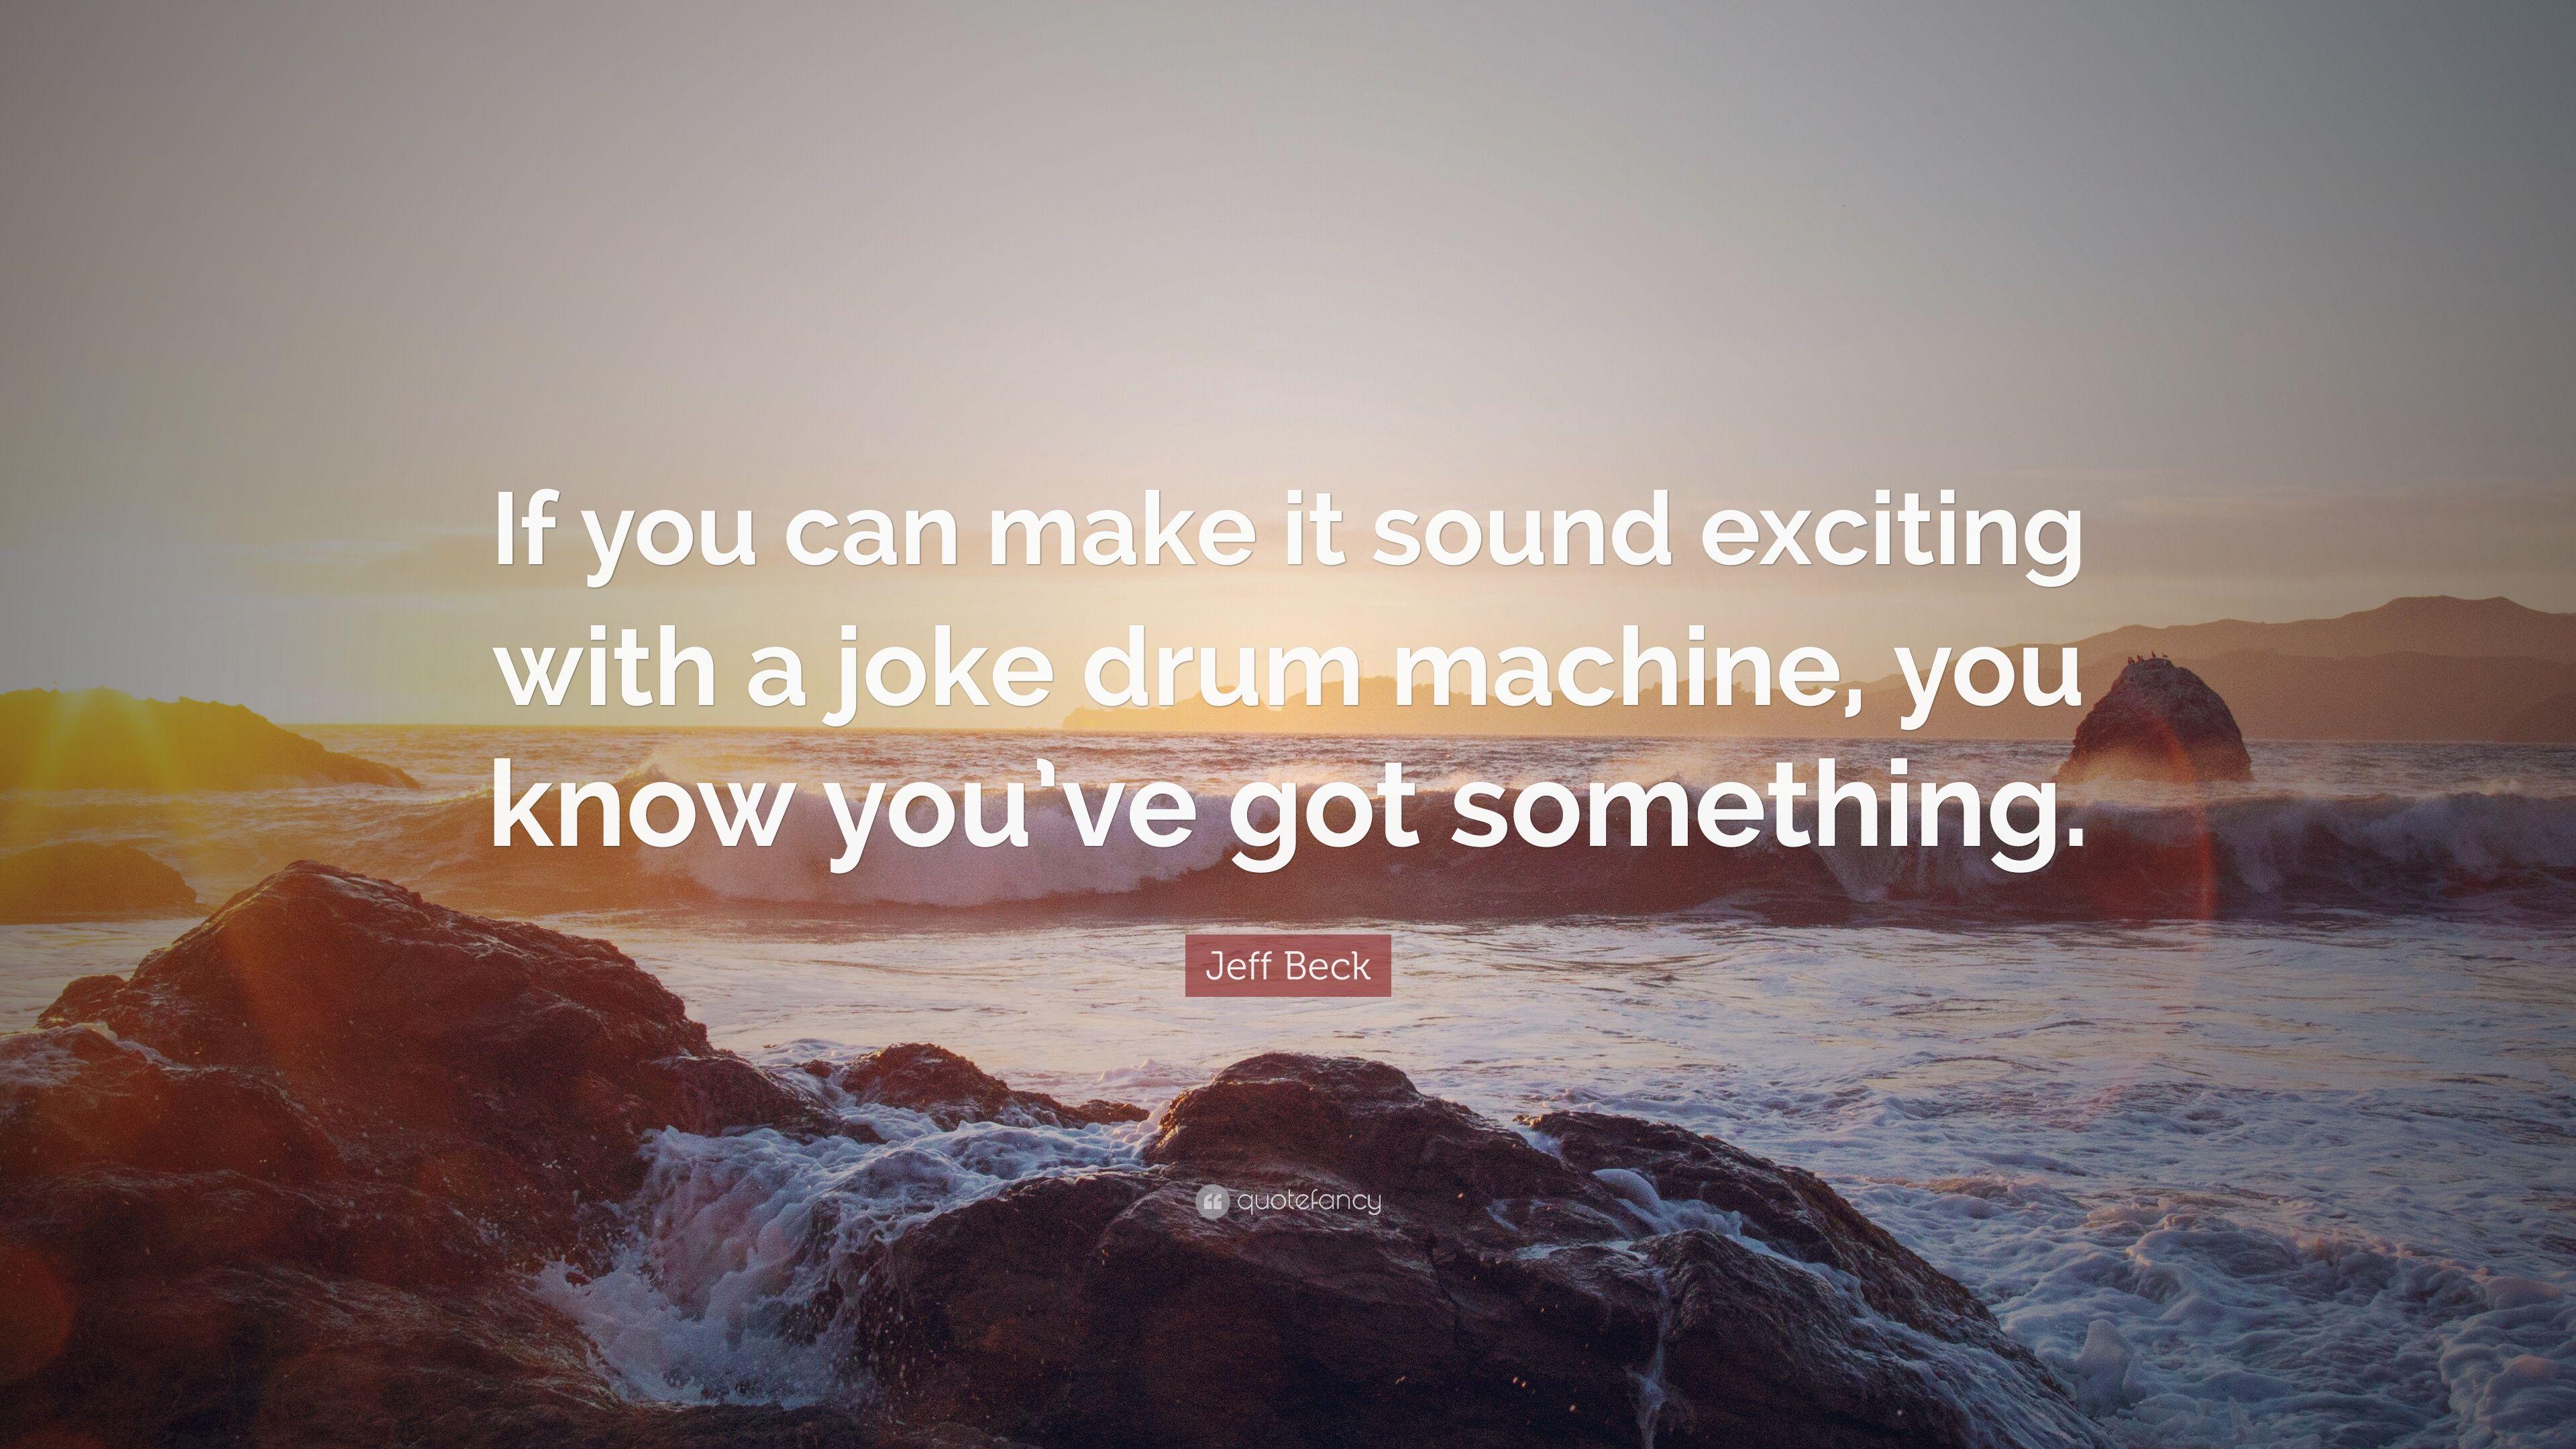 Jeff Beck Quote: “If you can make it sound exciting with a joke drum